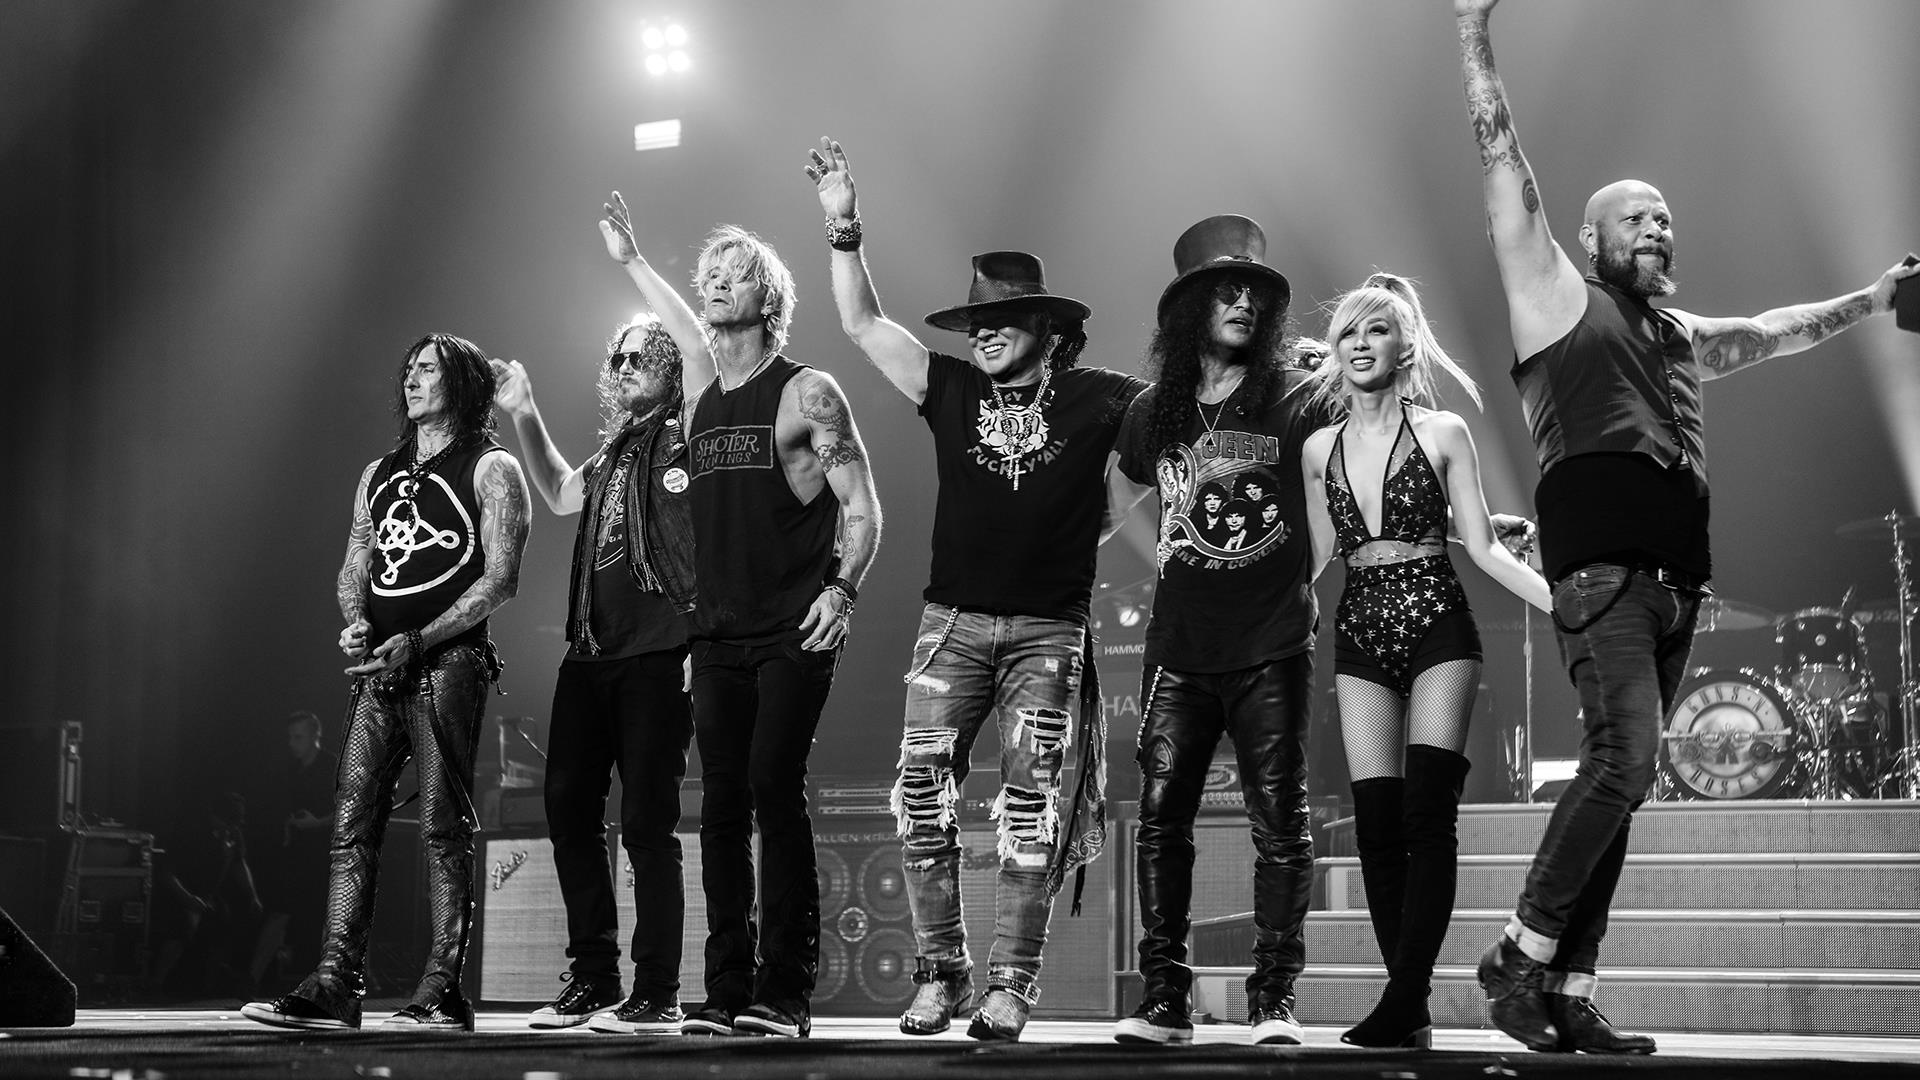 Guns N' Roses tickets, Tour dates, Concerts in 2022, Music rock band, 1920x1080 Full HD Desktop